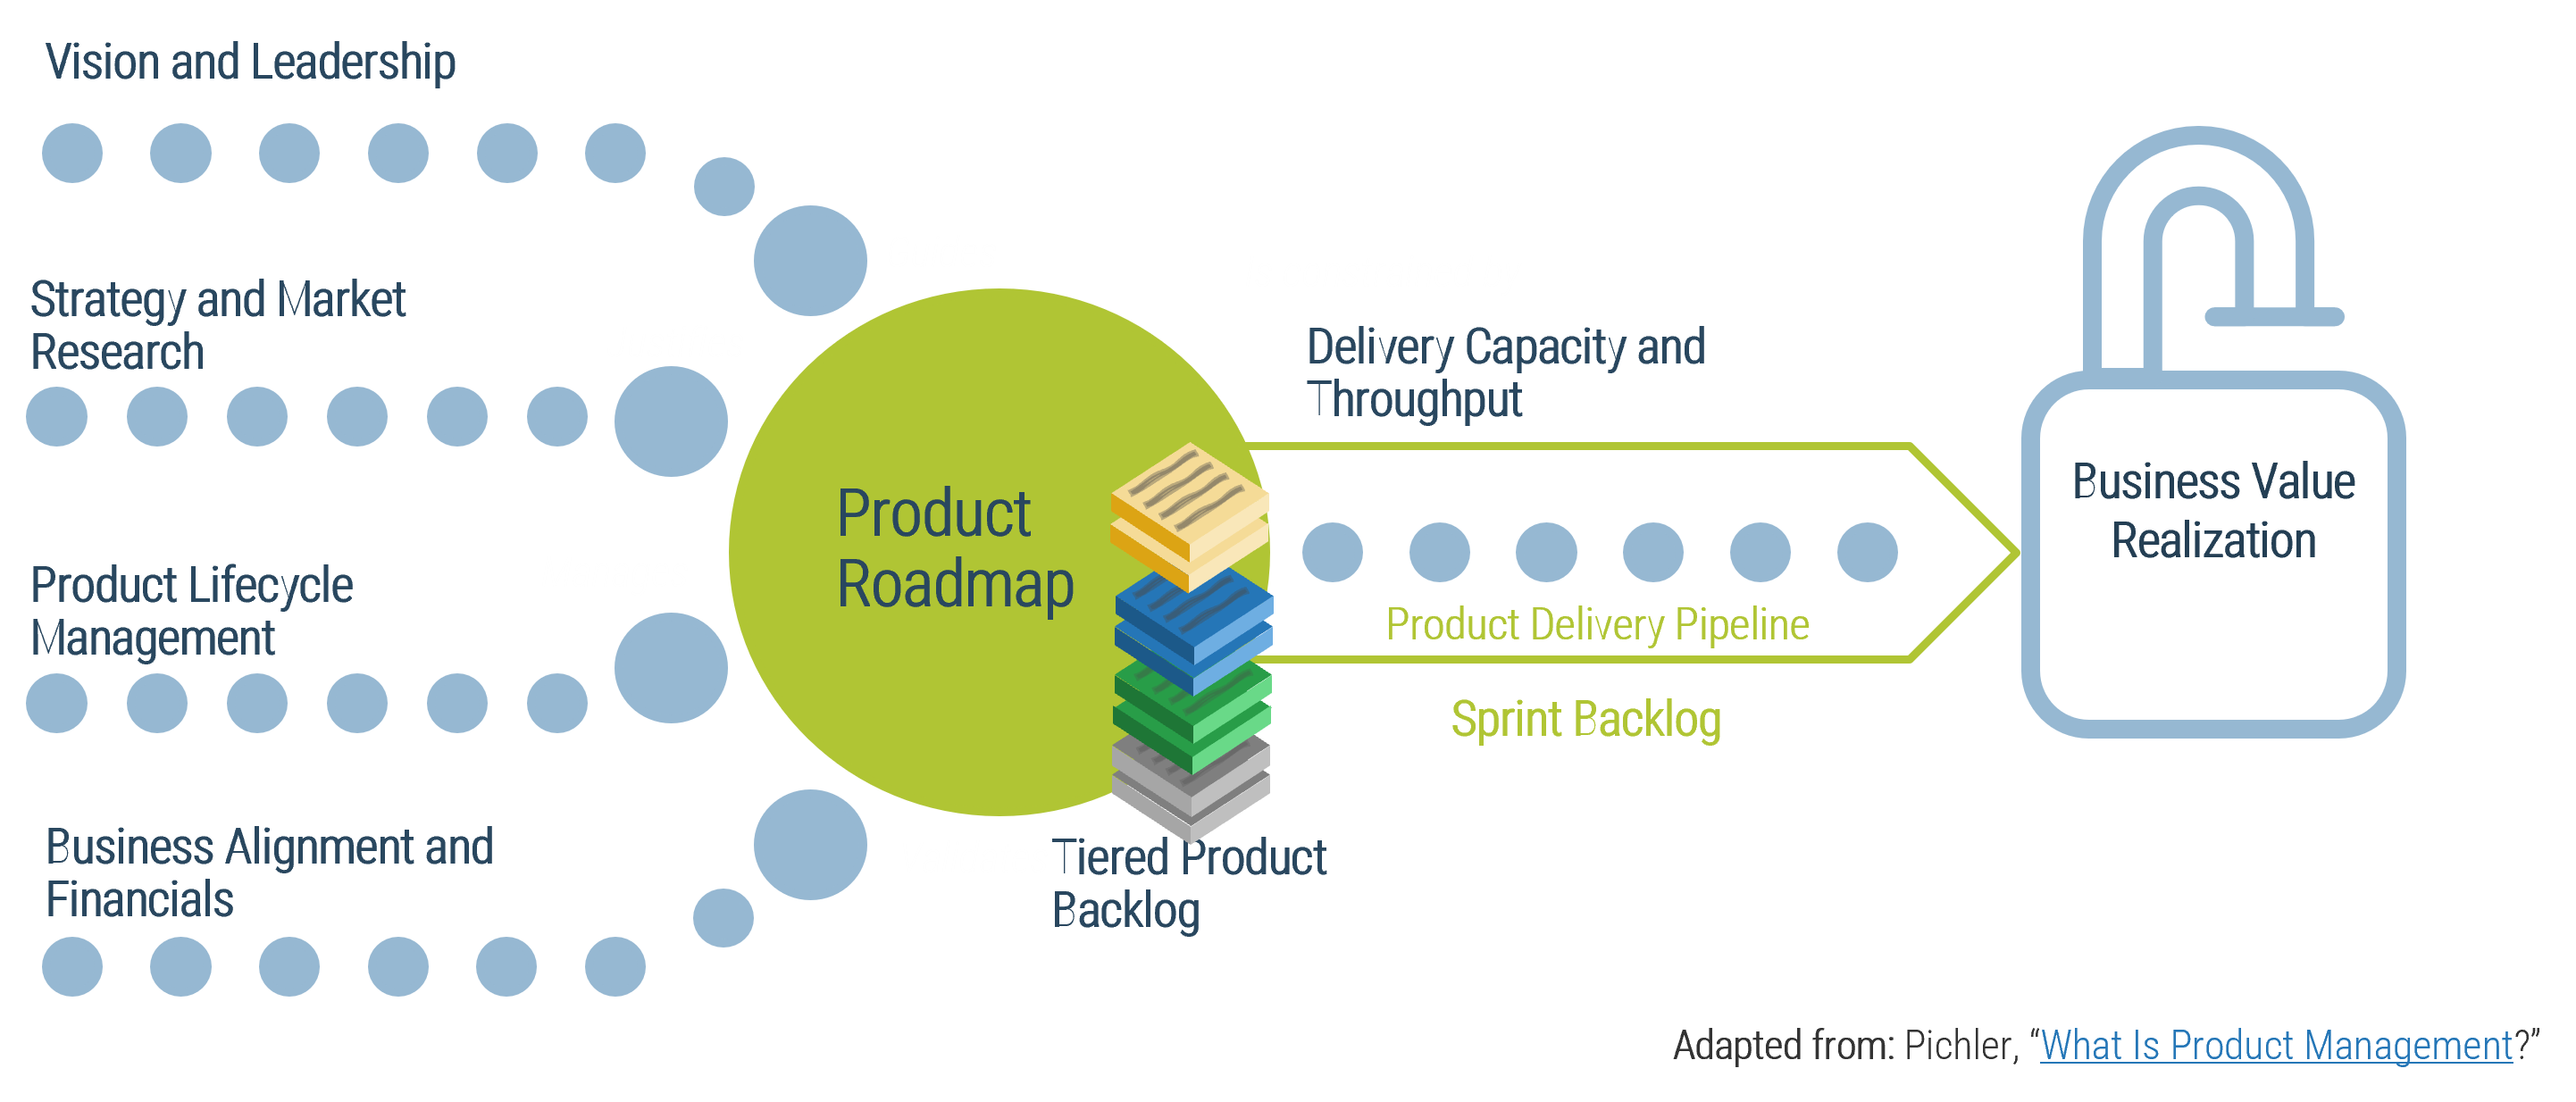 This is an image adapted from Pichler, What is Product Management.